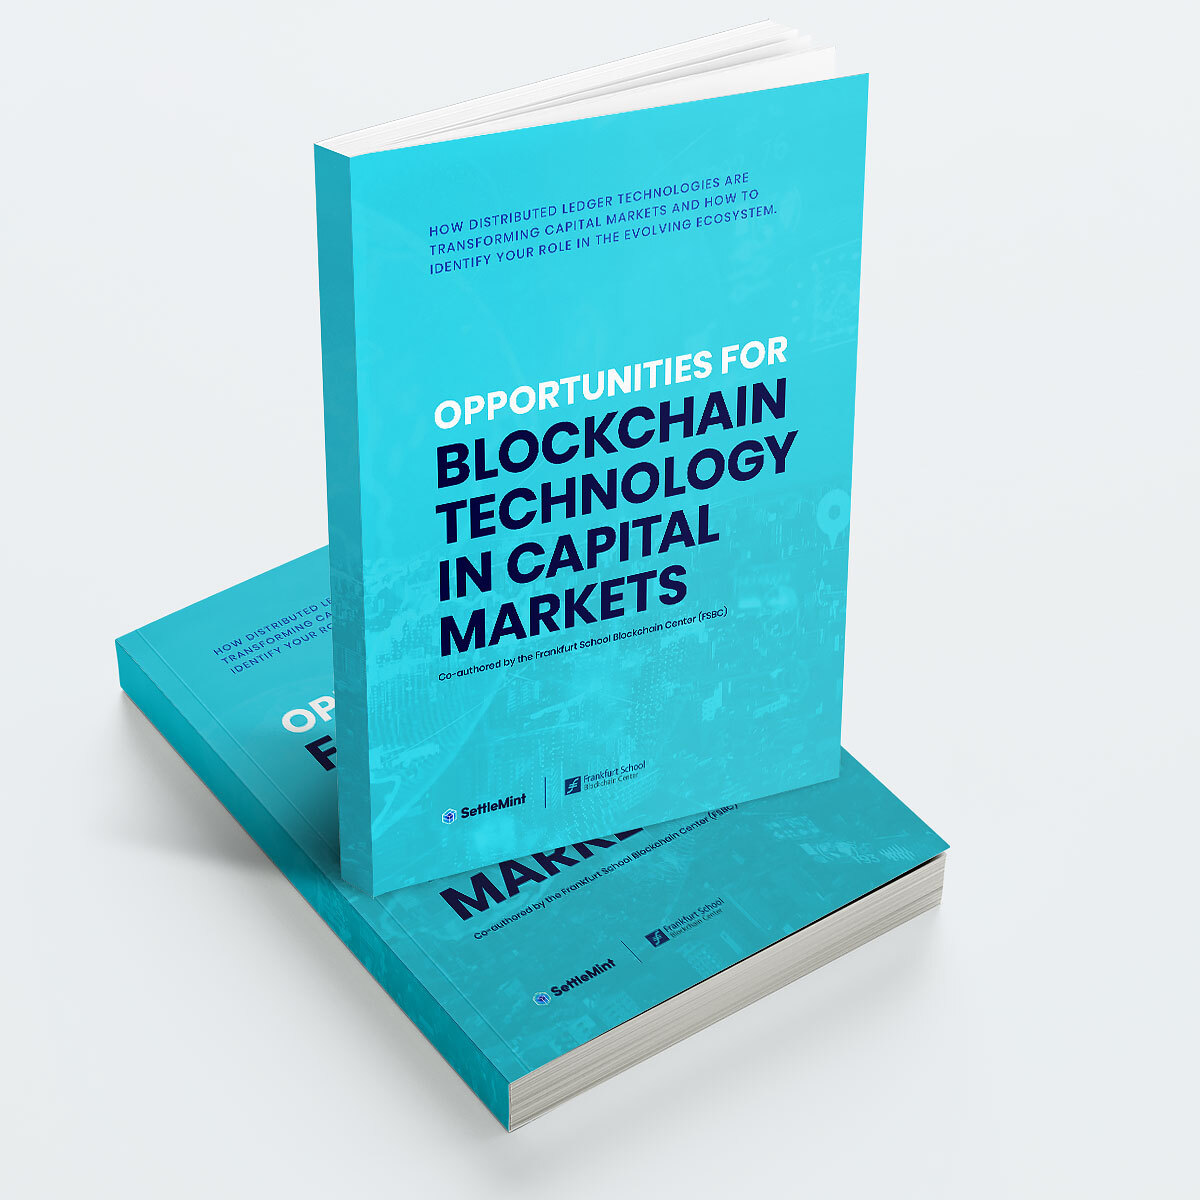 Opportunities for Blockchain Technology in Capital Markets